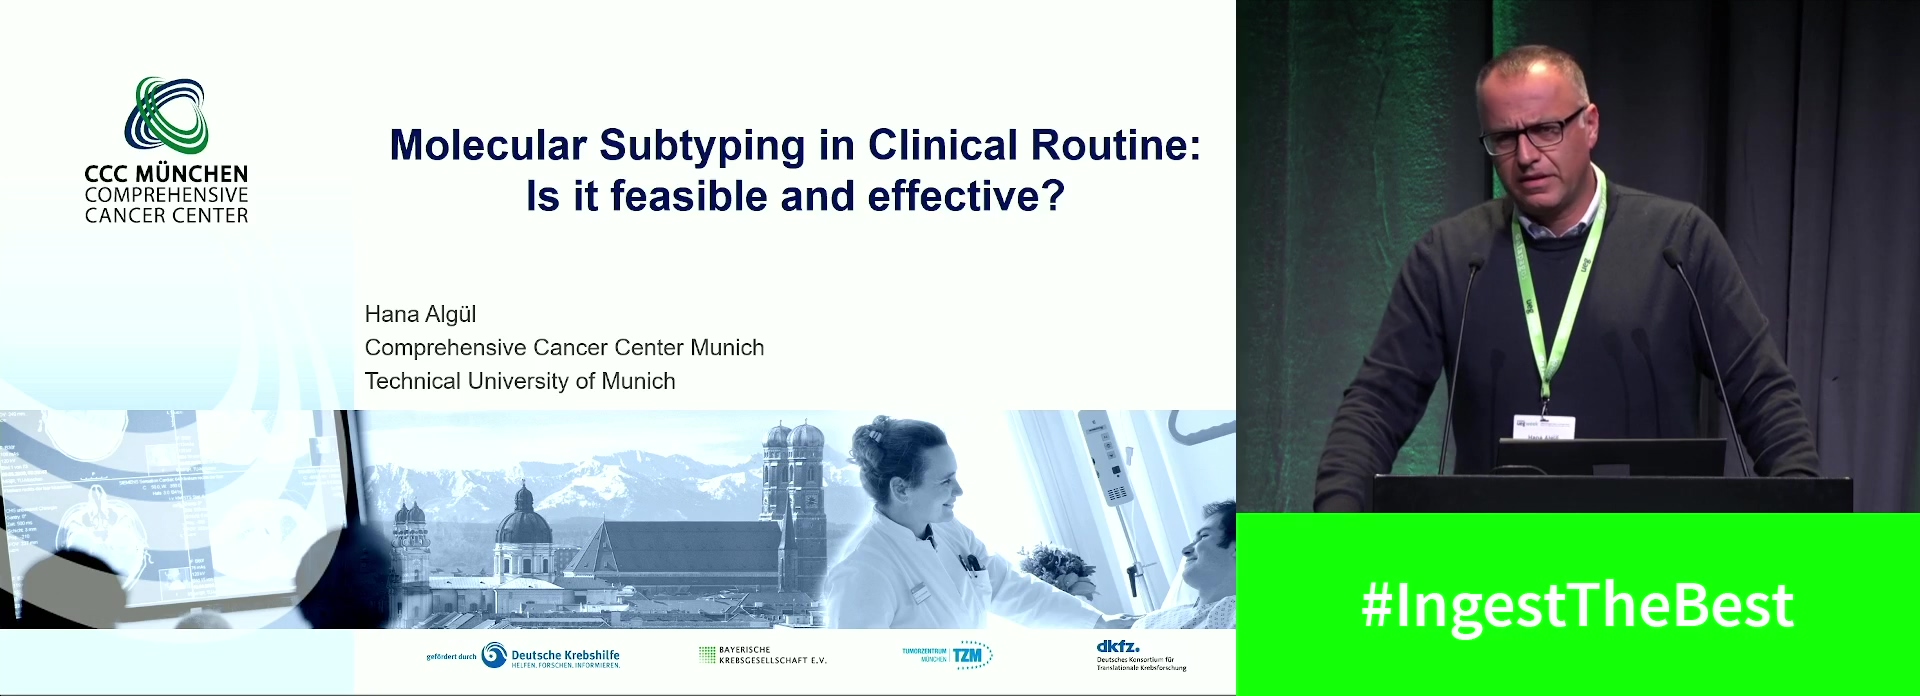 Molecular subtyping in clinical routine: Is it feasible and effective?